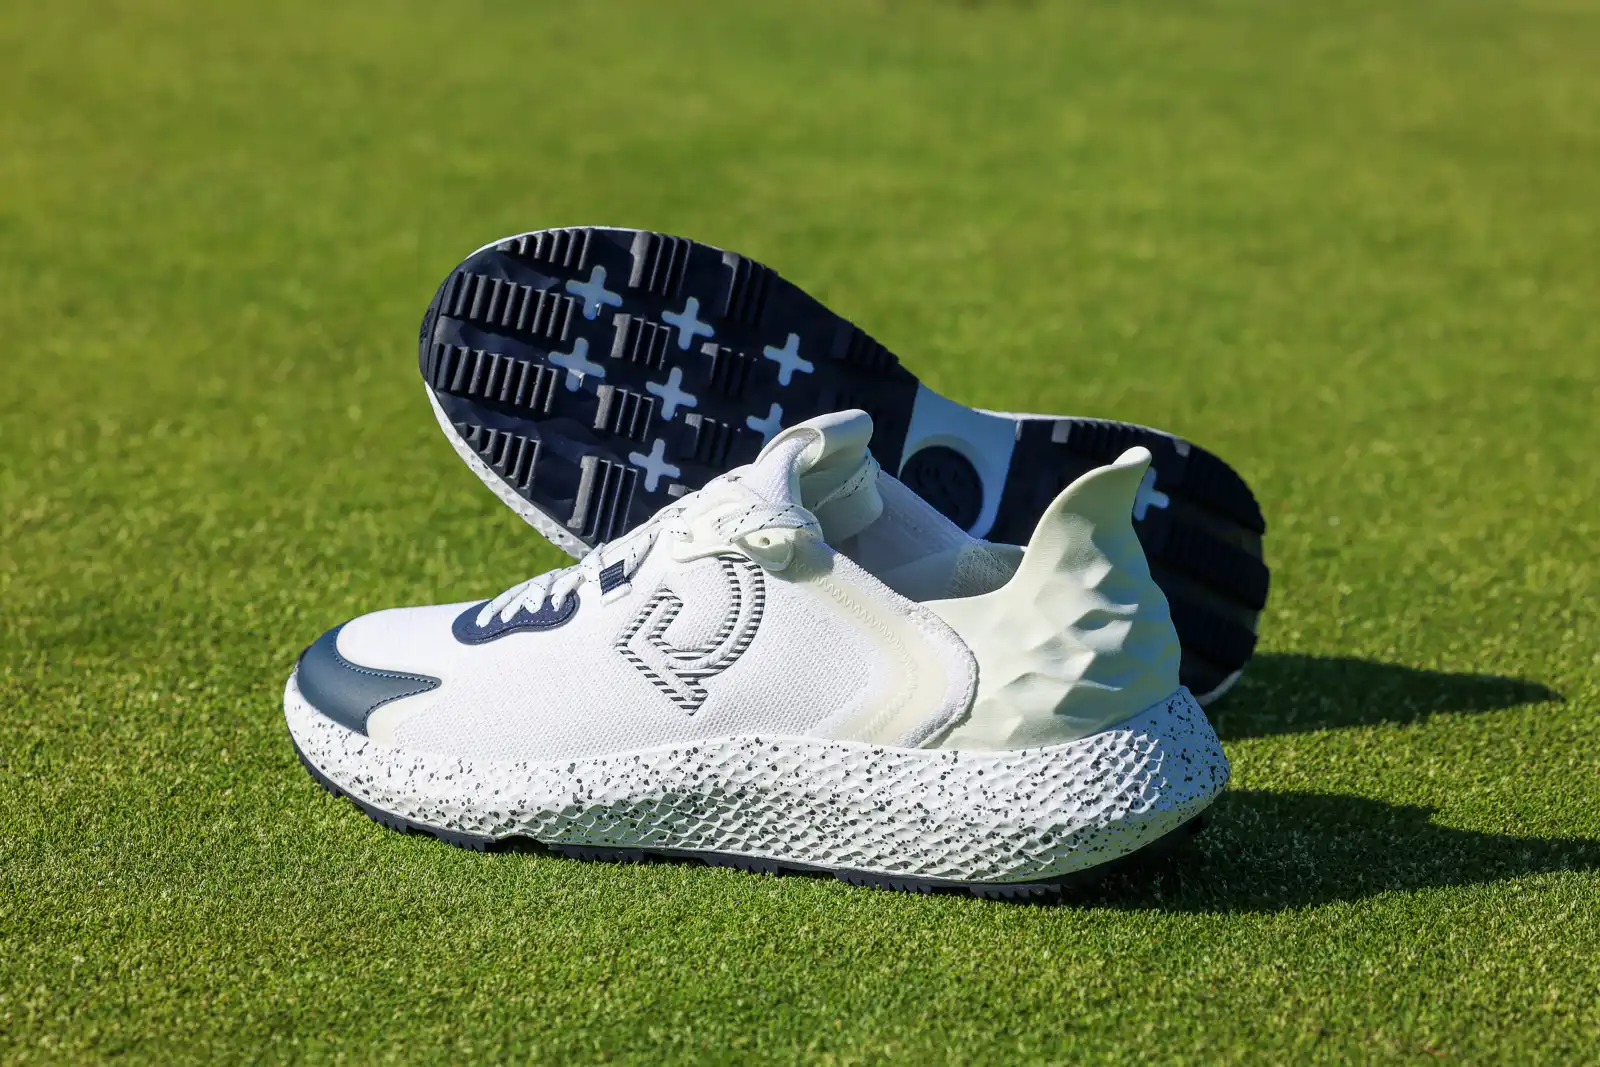 G/FORE MG4x2 Shoe // Use CODE: "G4BREAKING8010" for 10% off